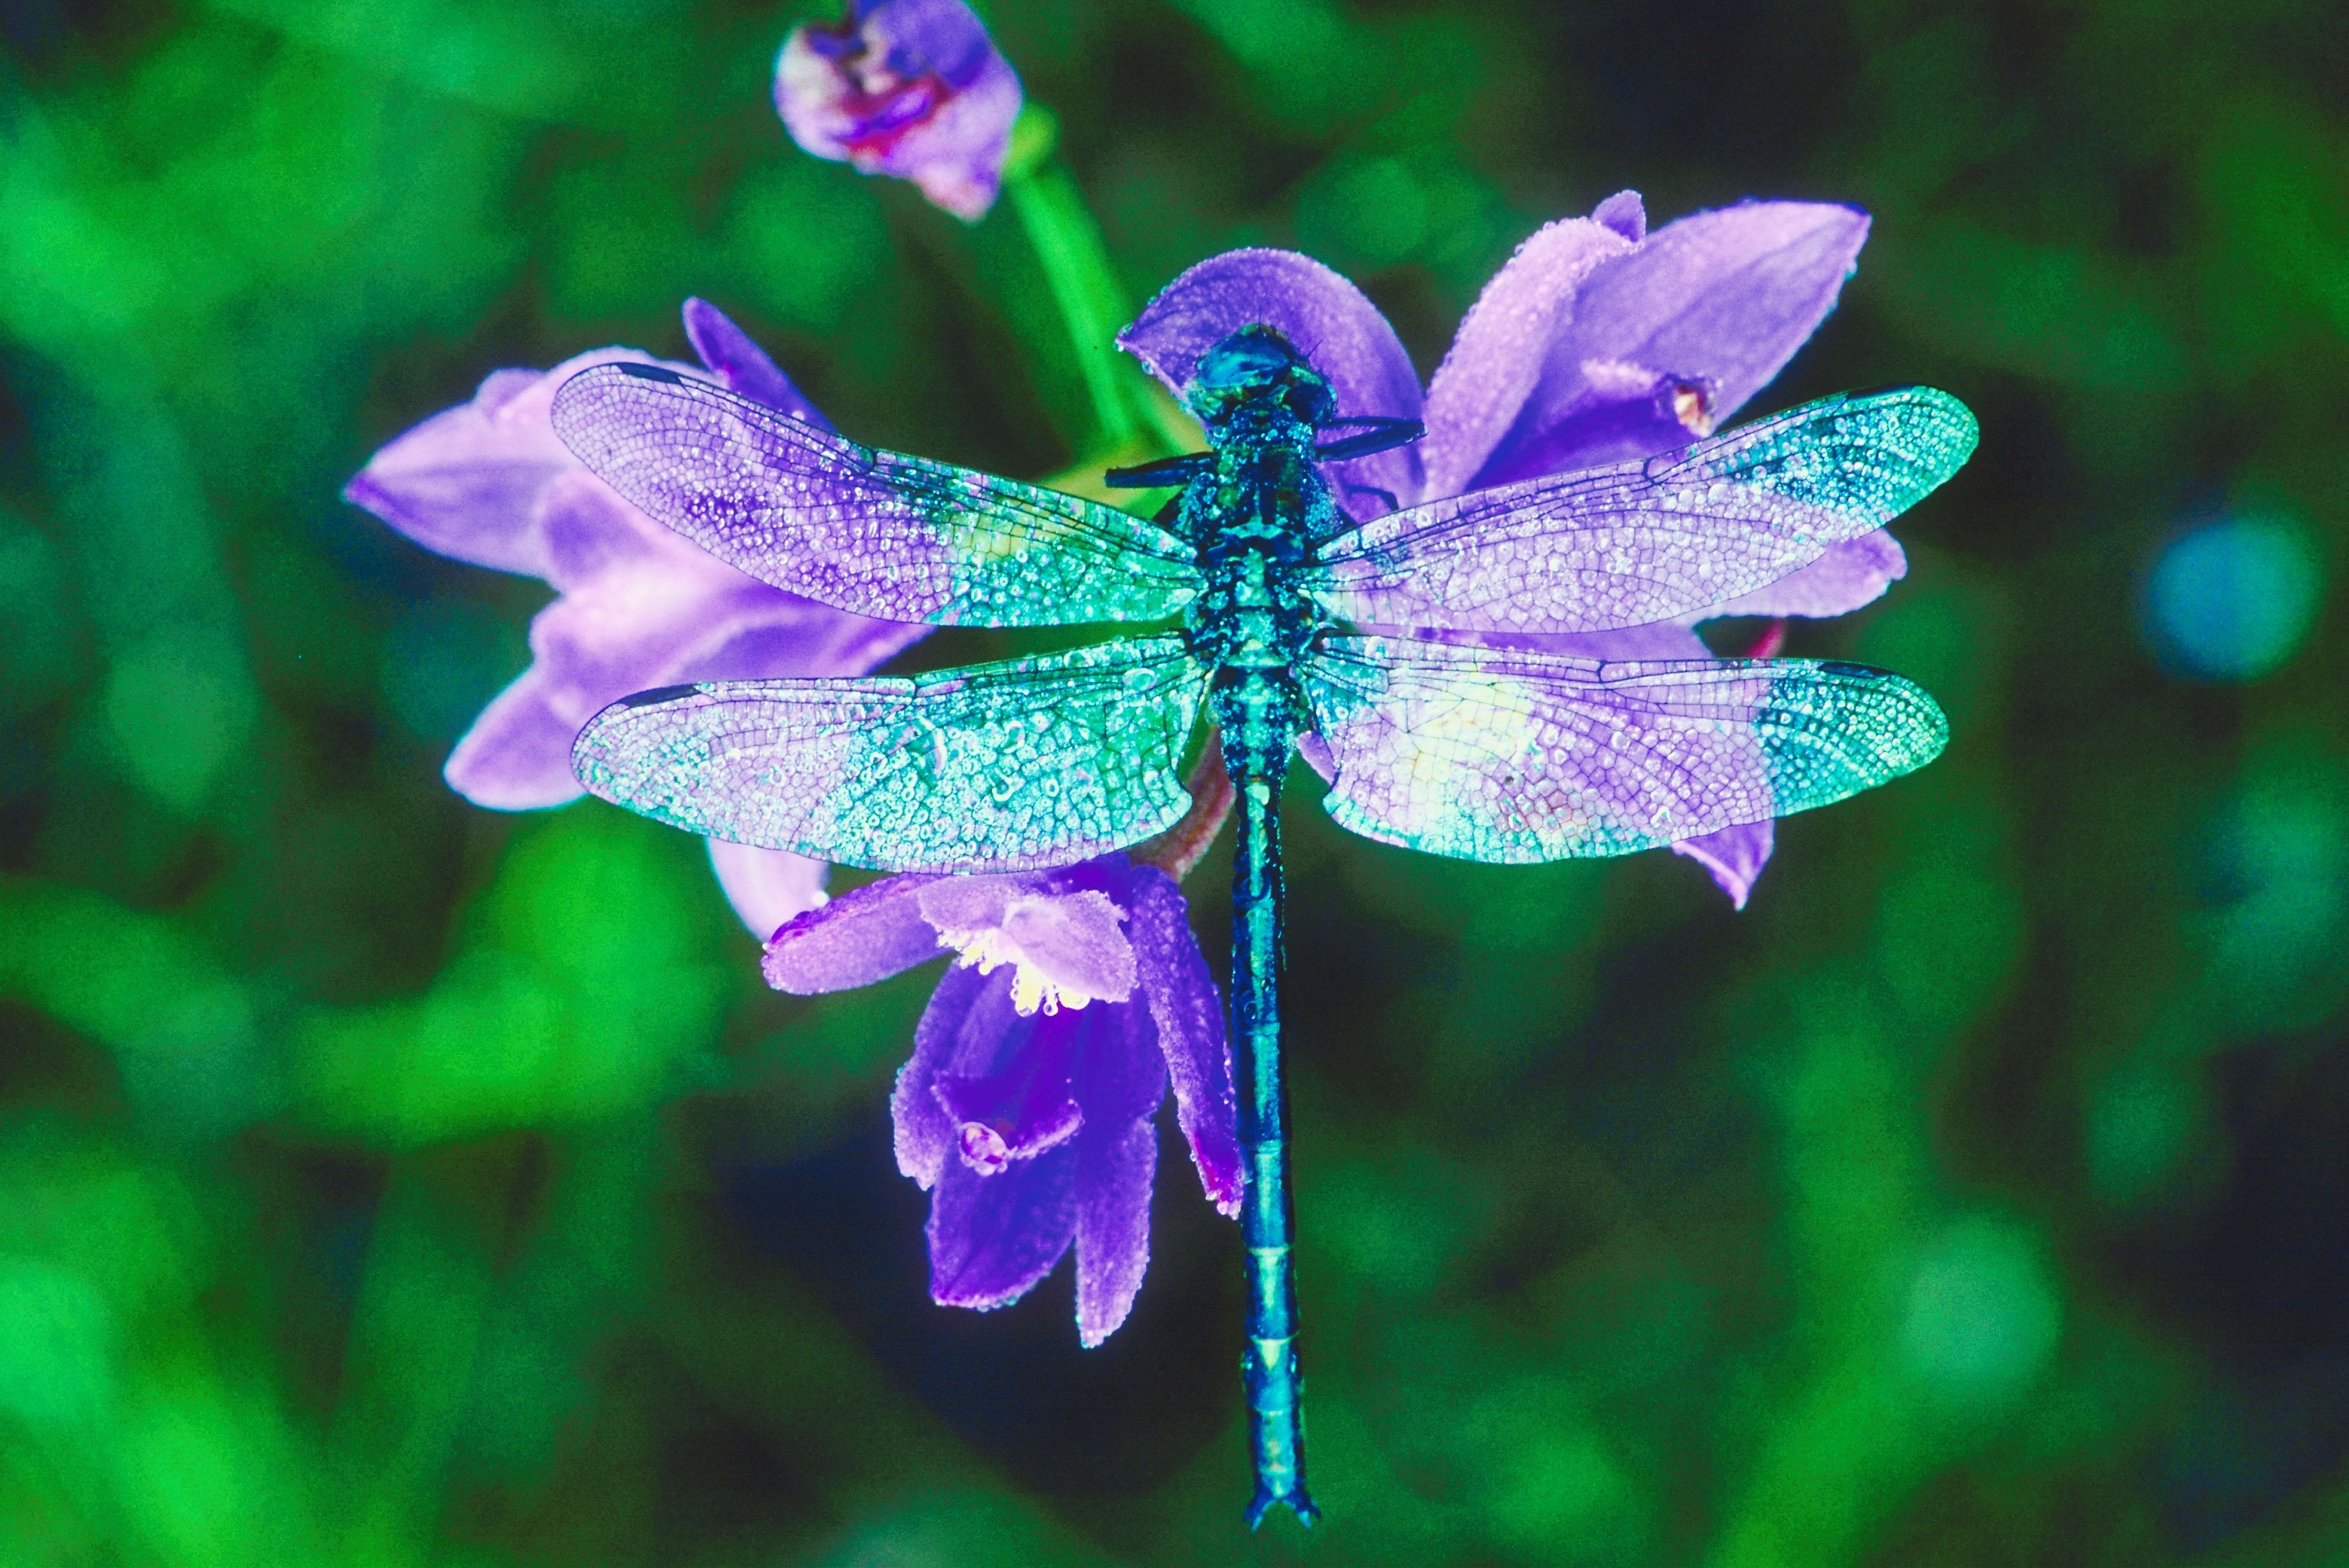 Dragonfly on flower